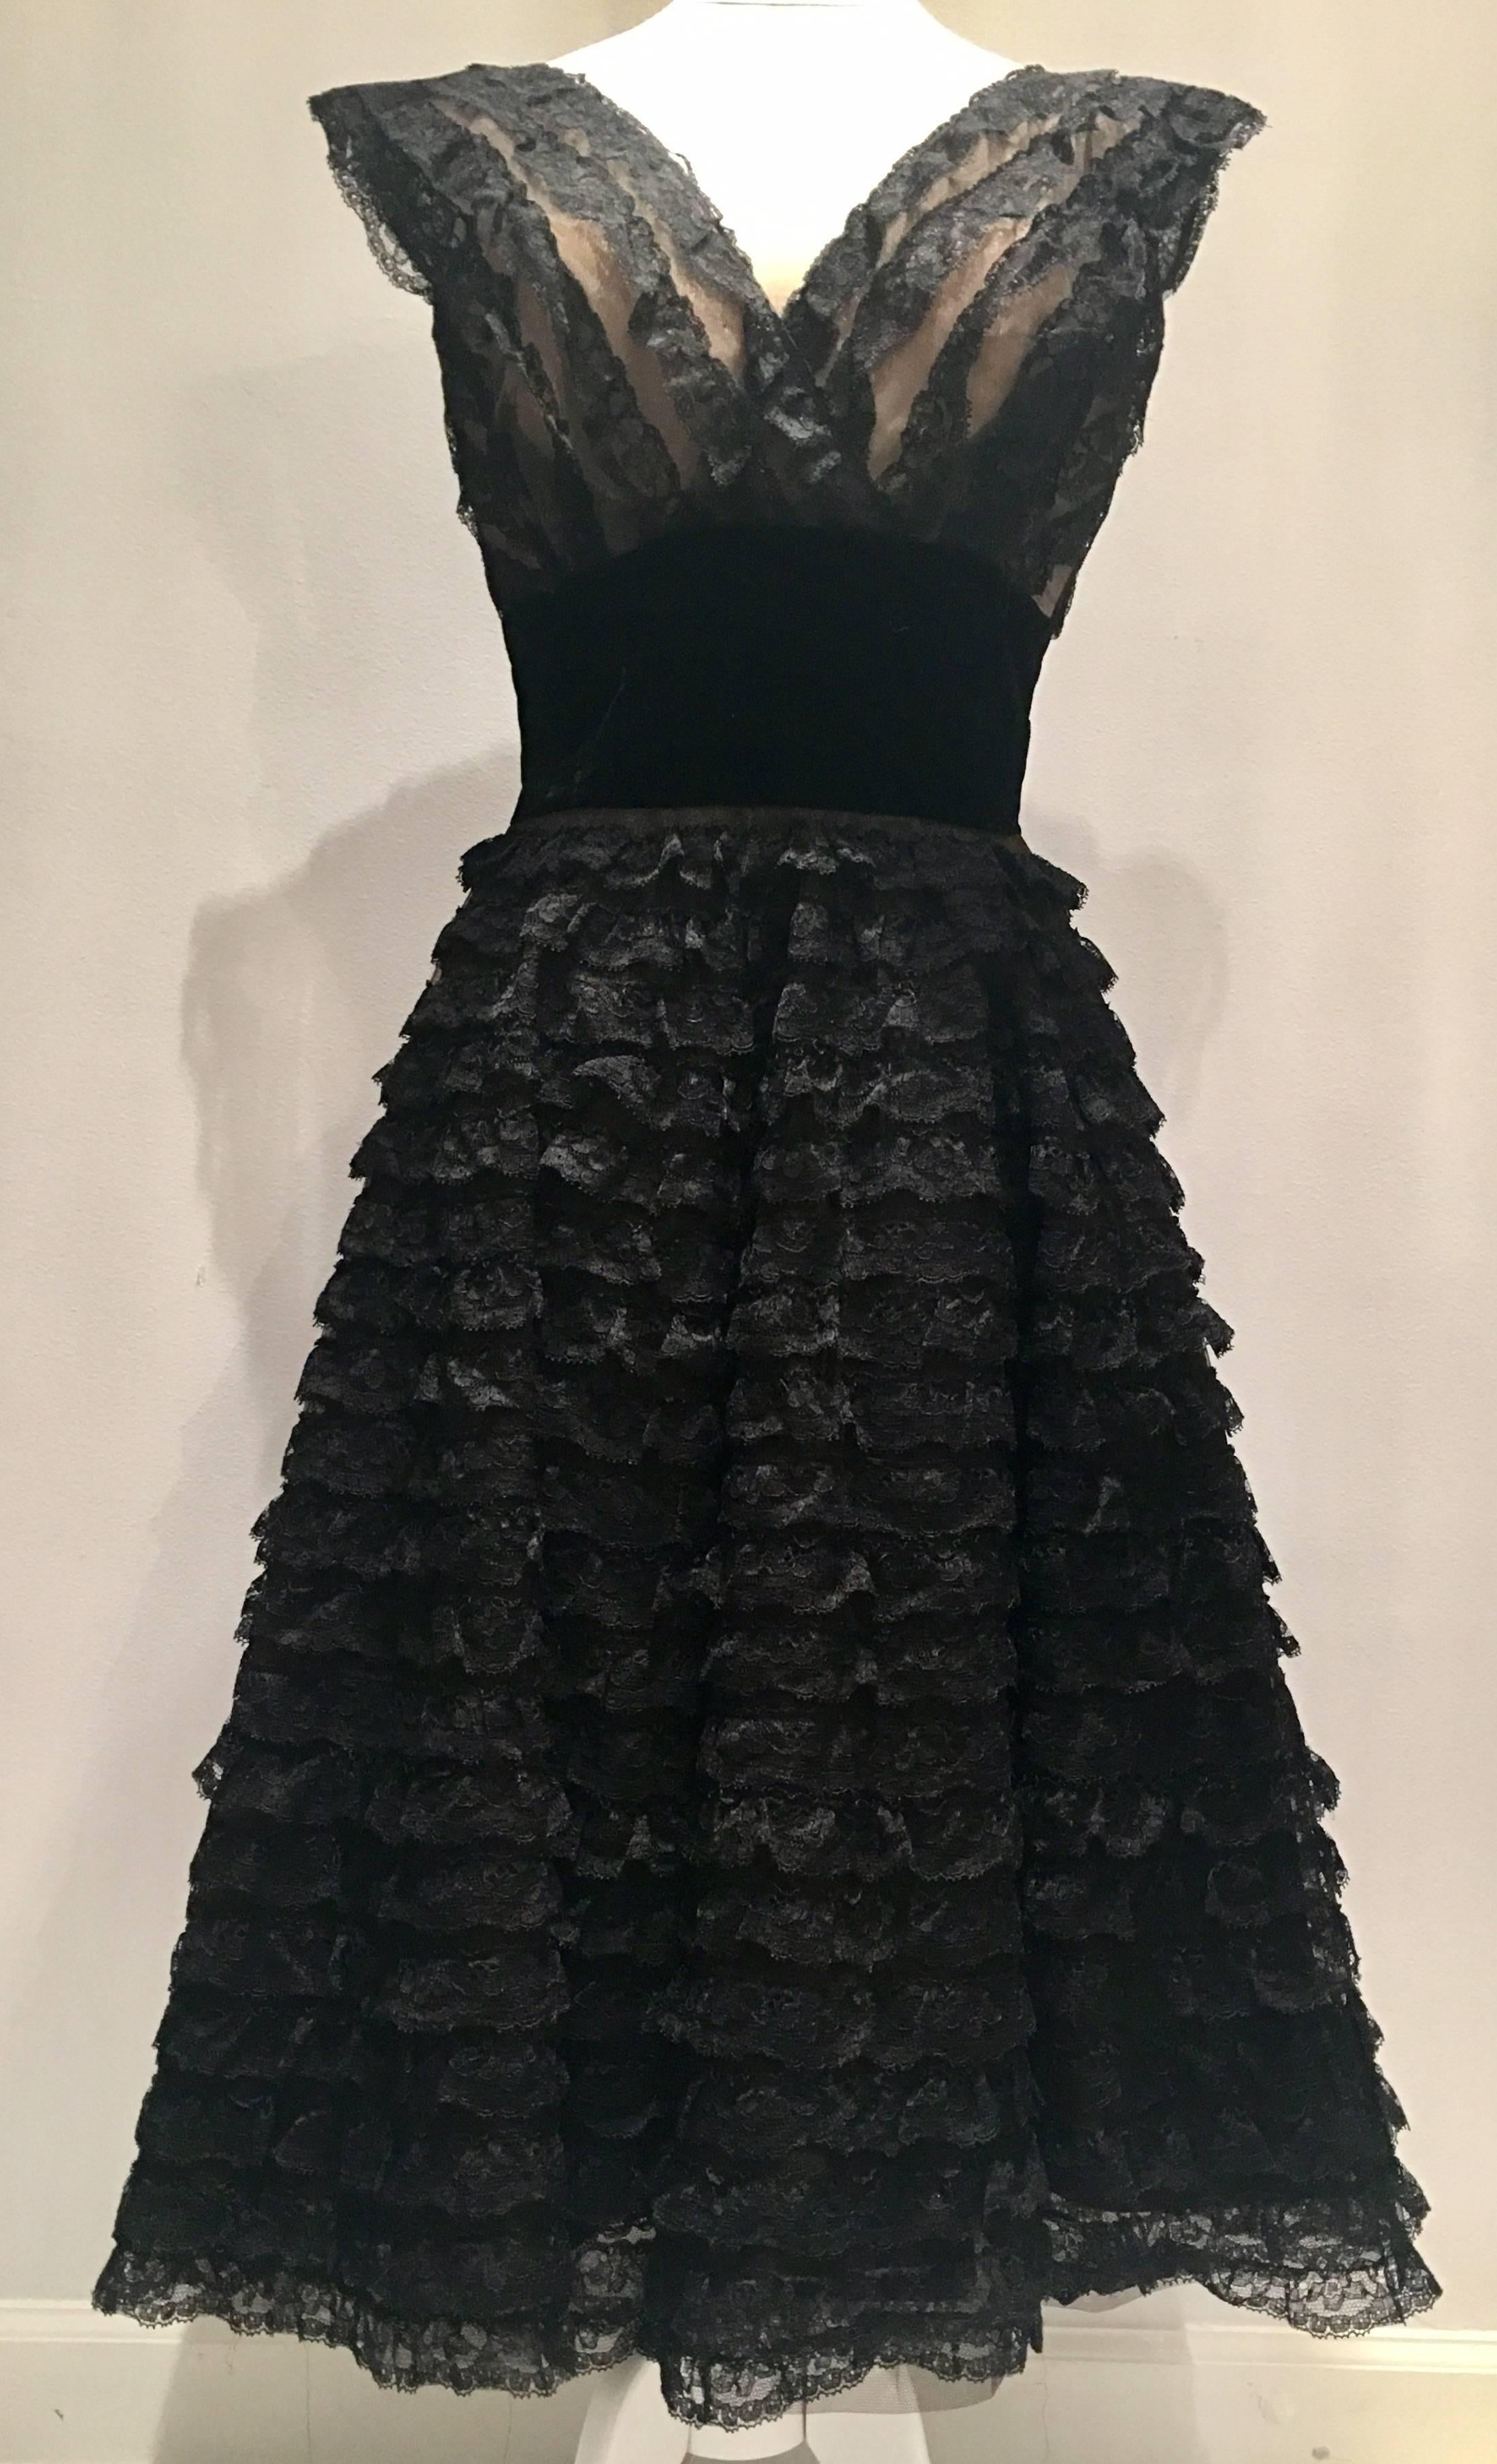 Extremely well crafted iconic 1950'S handmade black lace and velvet nude bodice pouf party dress. Skirt has a triple layer of lining, one in tulle to give it the "pouf" and style of the era. The bodice lining is a boned nude strapless